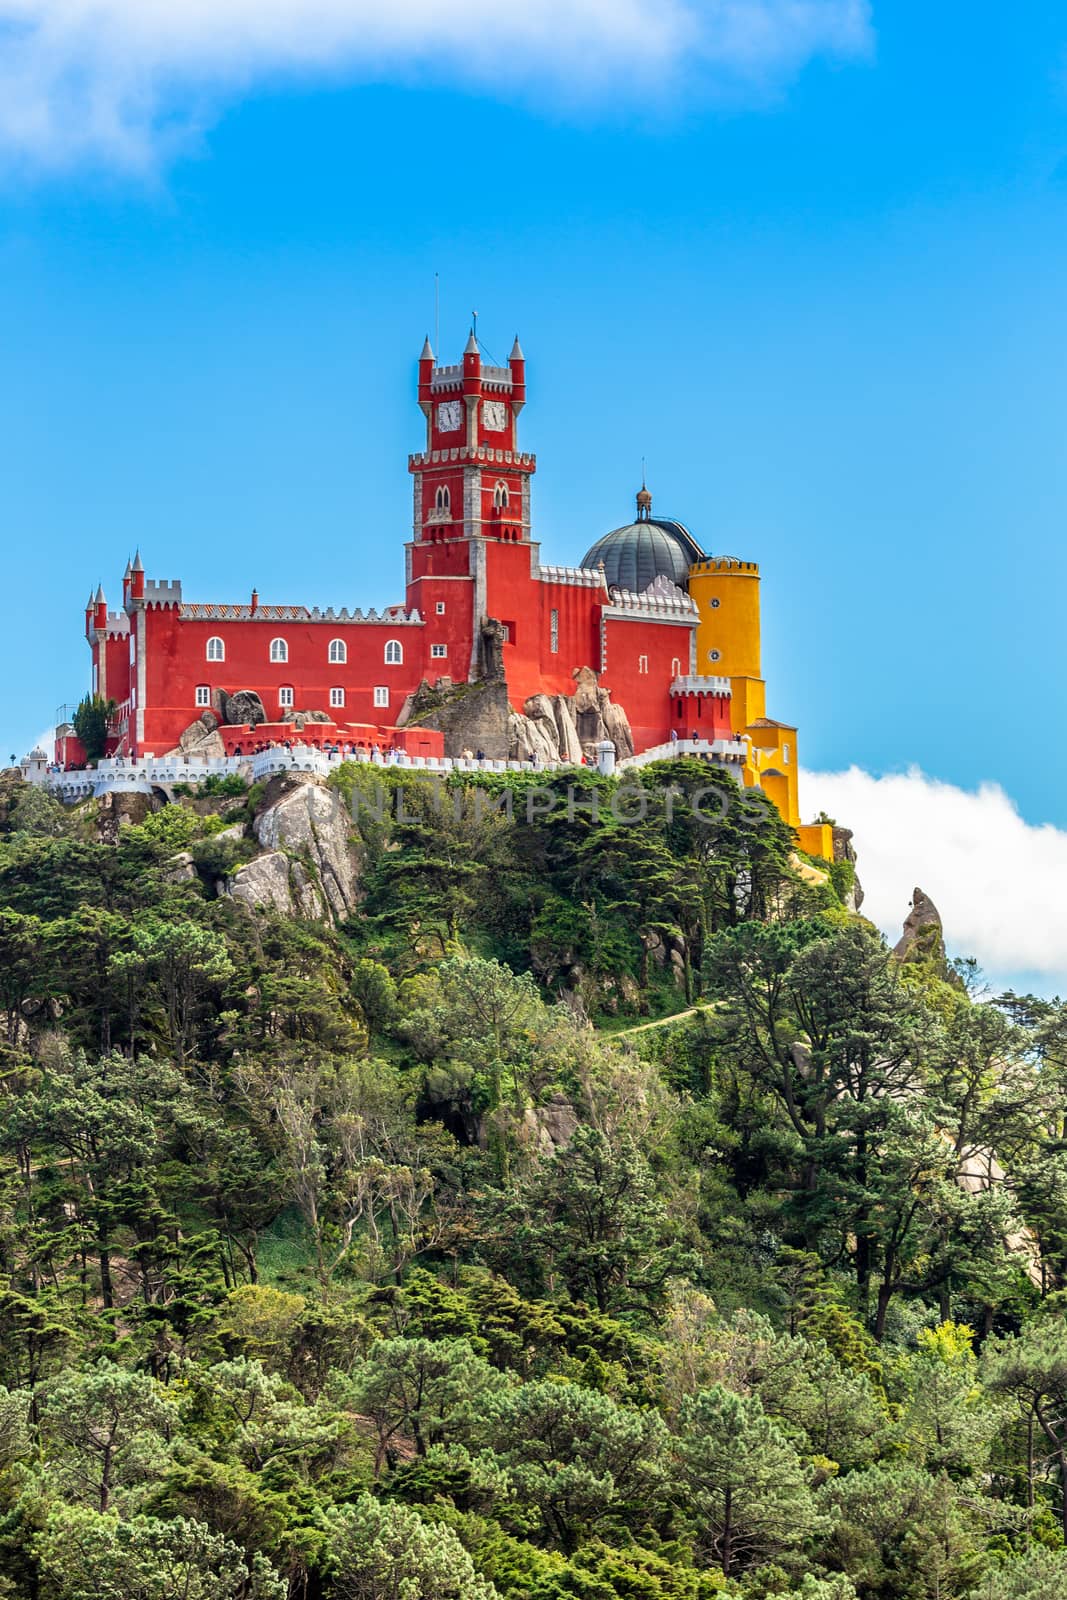 The red and yellow walls and towers of Pena Palace, Sao Pedro de Penaferrim, Sintra, Portugal